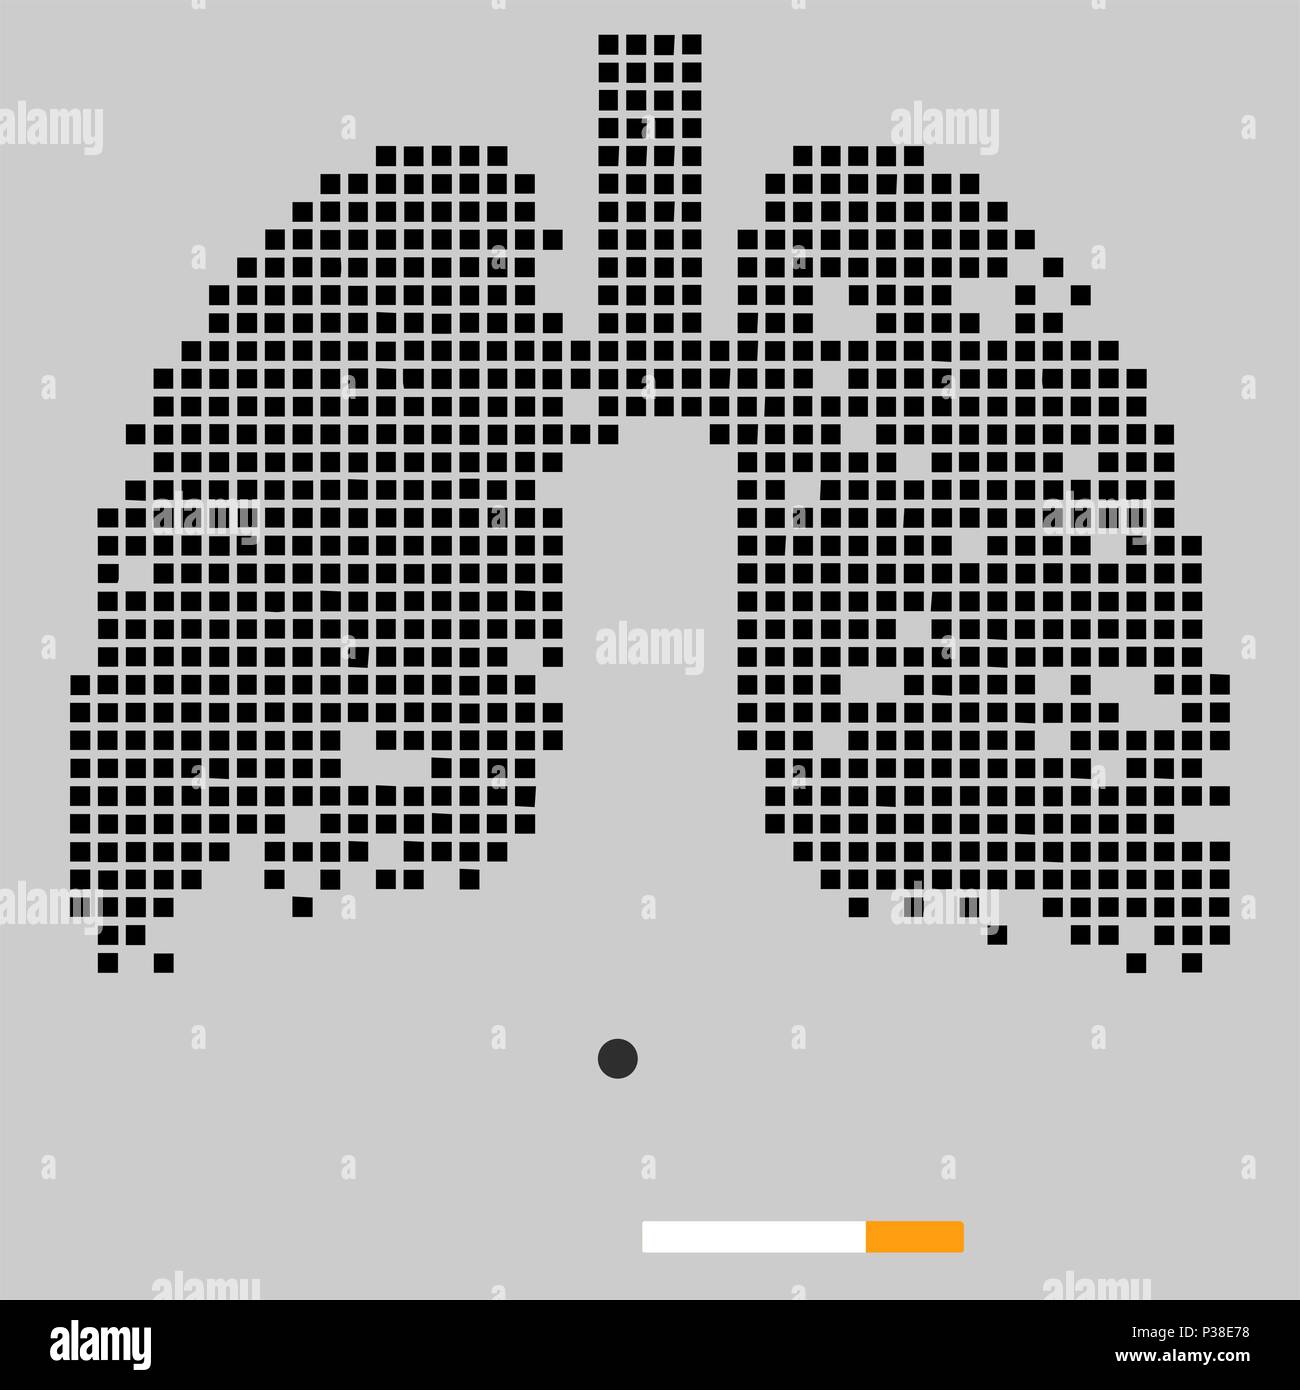 Destruction of lungs under the influence of cigarettes. Vector illustration. Black checkered lungs on a grey background. Stock Vector